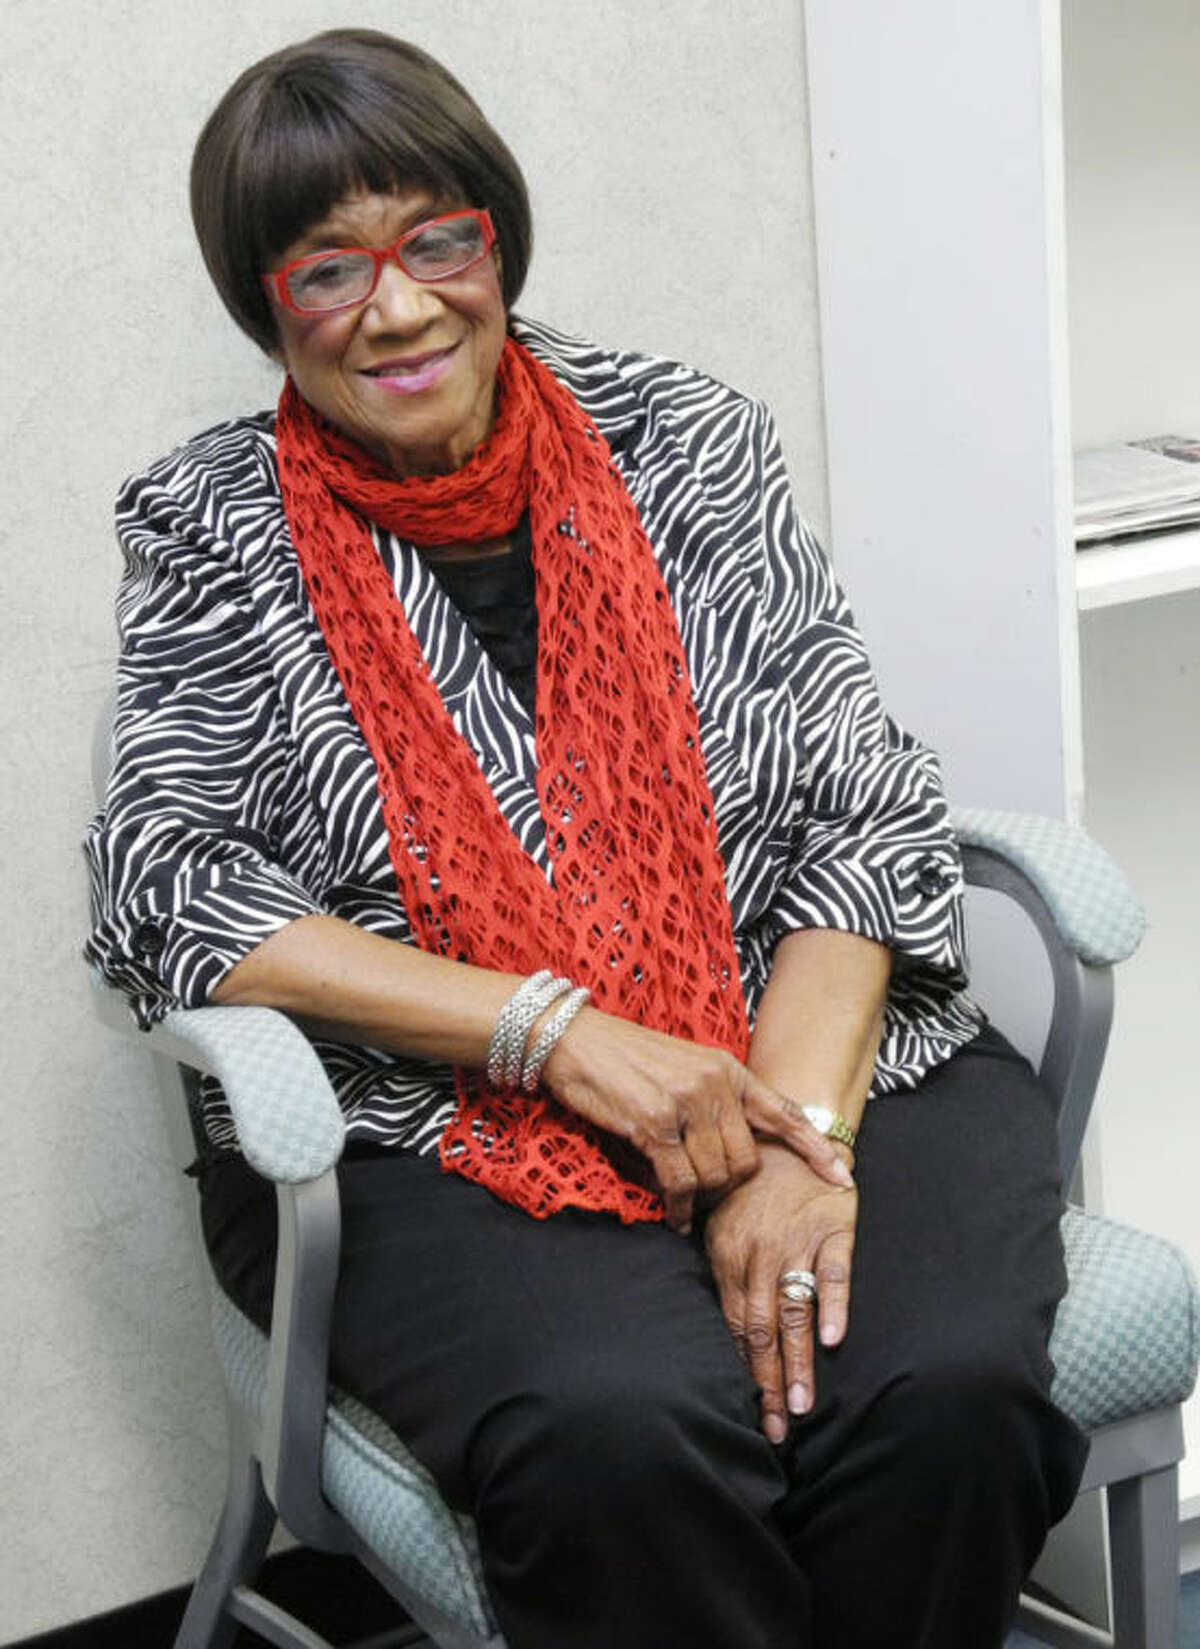 Rubye Henderson, 76, a longtime Plainview educator, has been selected as this year’s Shining Star recipient by the Cotton Baron’s Ball. A cancer survivor, she is a key supporter of ACS programs and events.